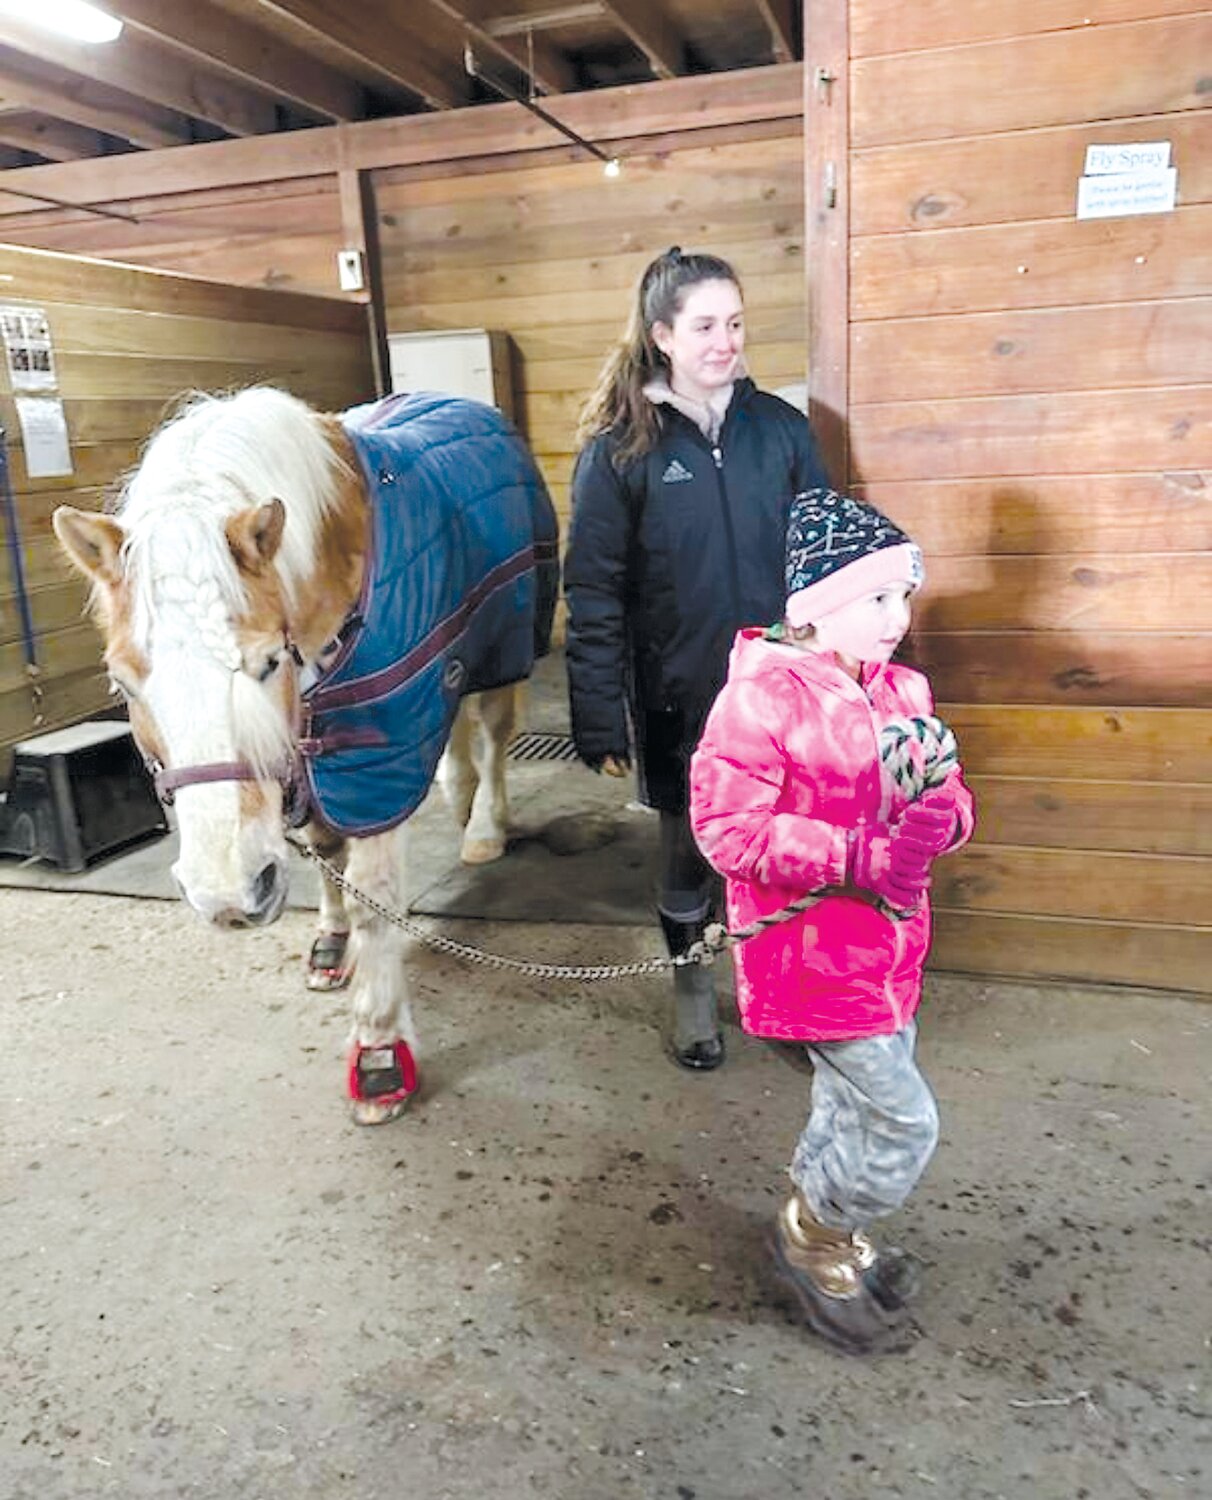 Members of Horsin’ Around recently learned about therapeutic riding.